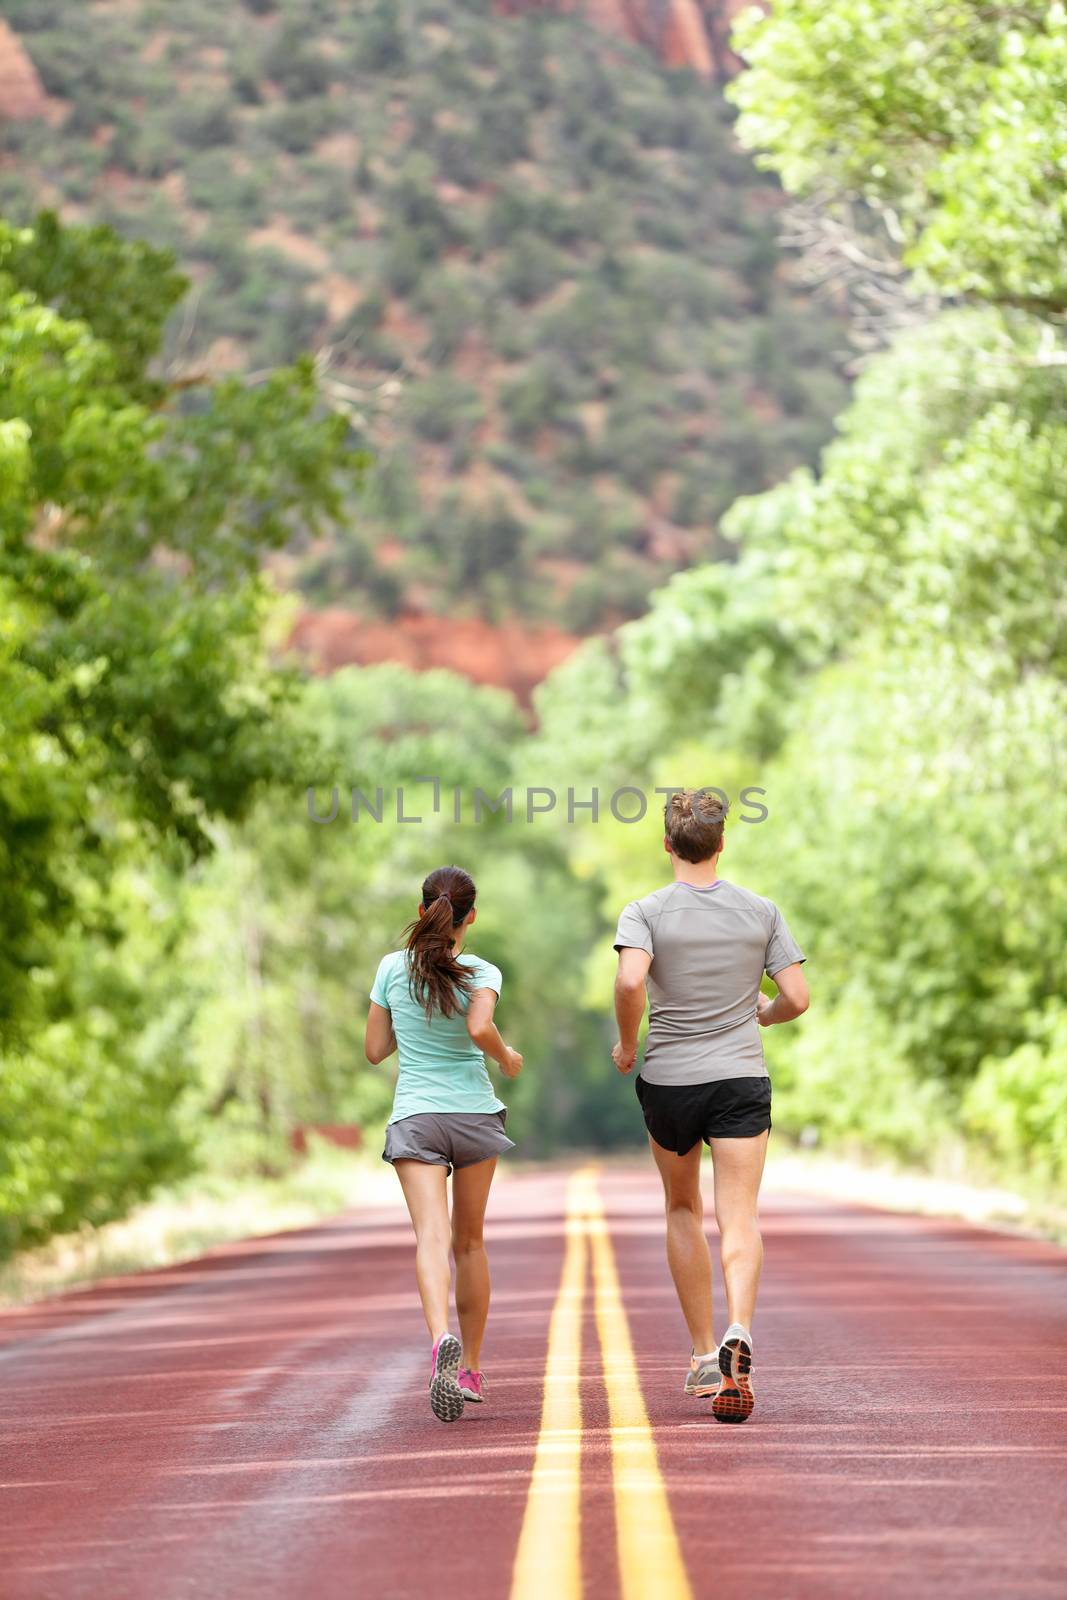 Runners running on road in nature away from camera. Couple, woman and man jogging for a run outside in amazing mountain landscape. Full body length rear view of back. Fitness and healthy lifestyle.